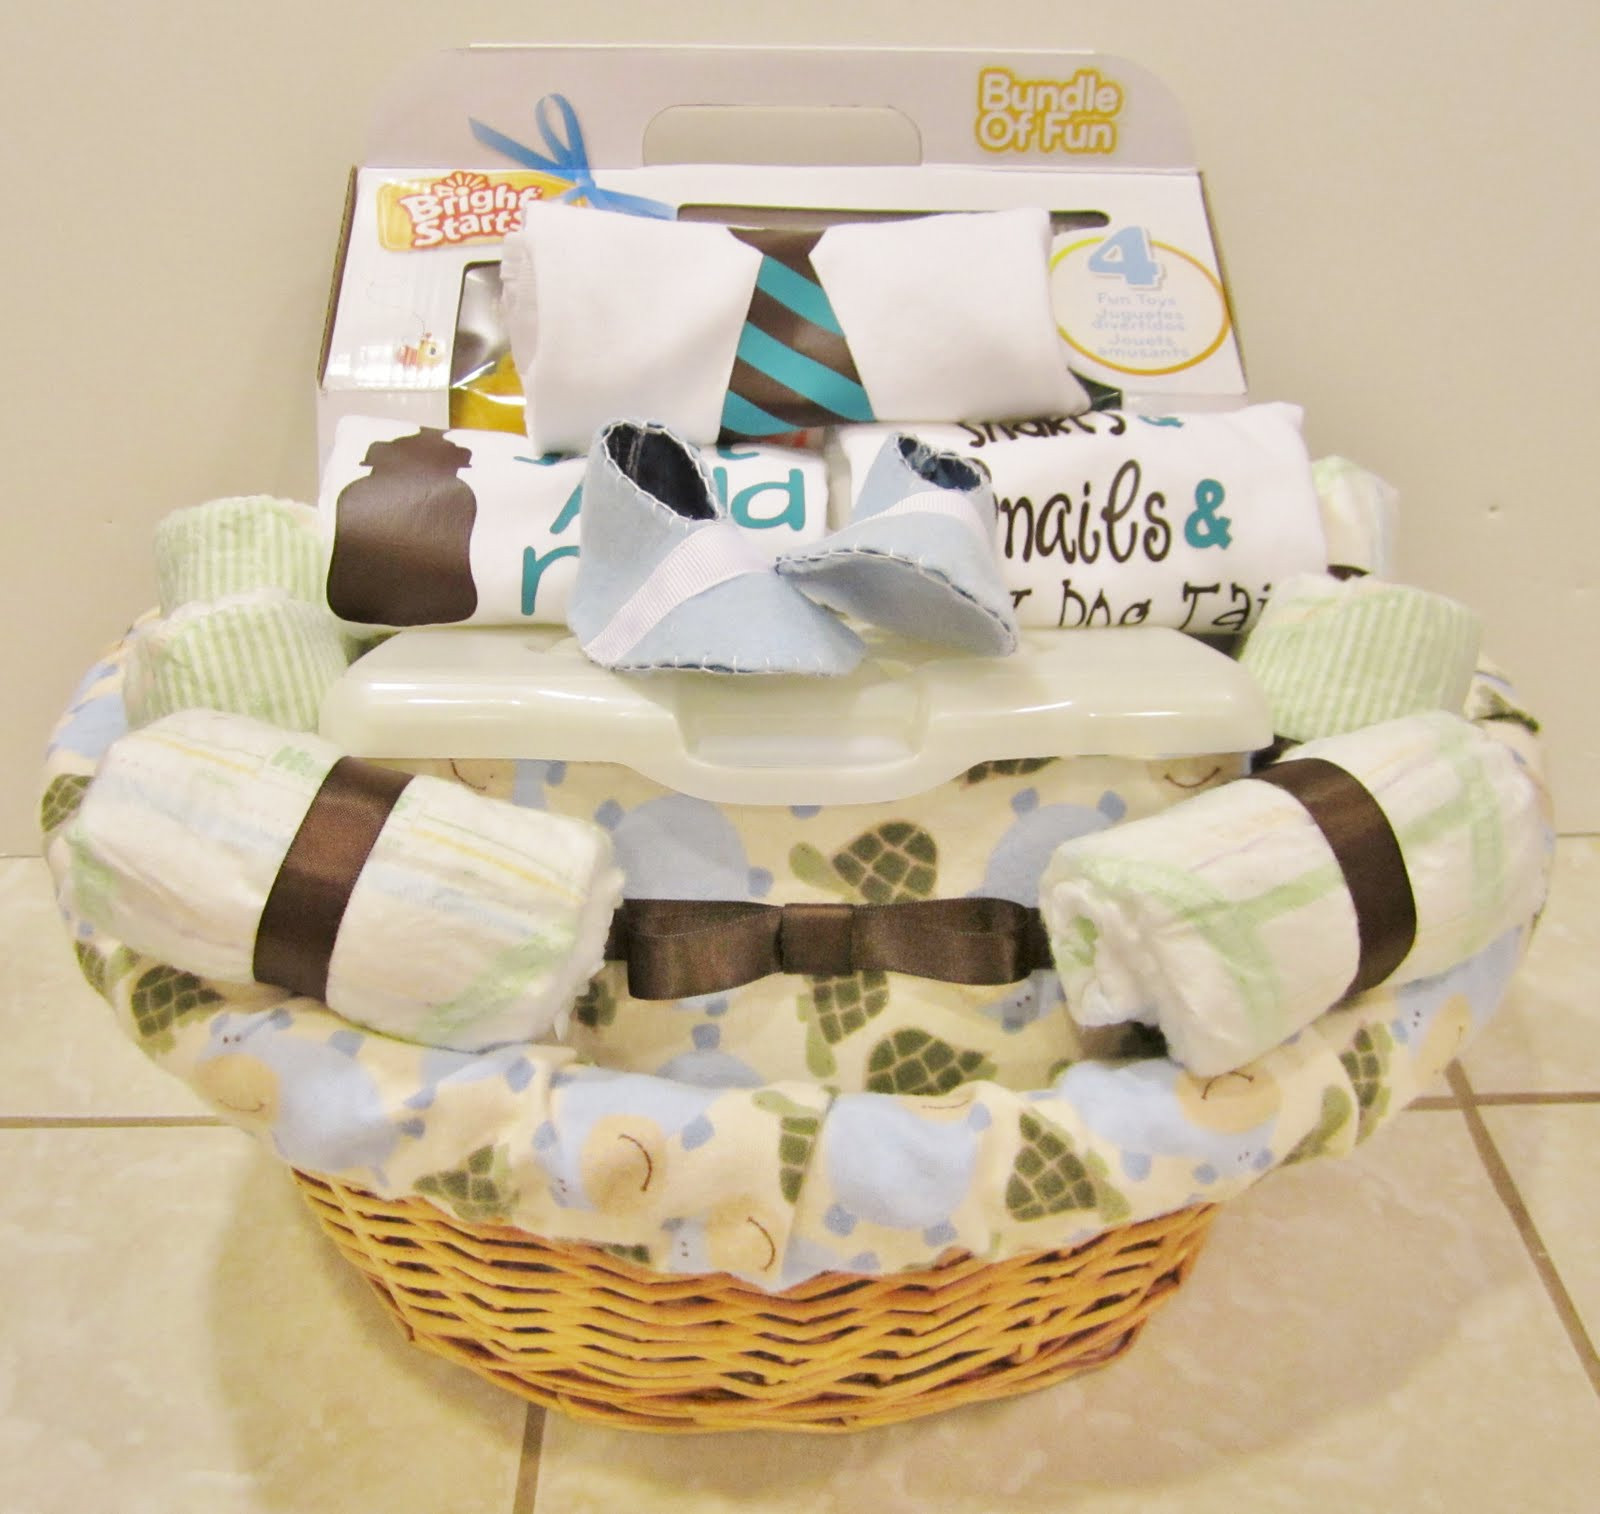 Ideas For Baby Shower Gift Baskets
 Life in the Motherhood Baby Shower Gift Basket For a